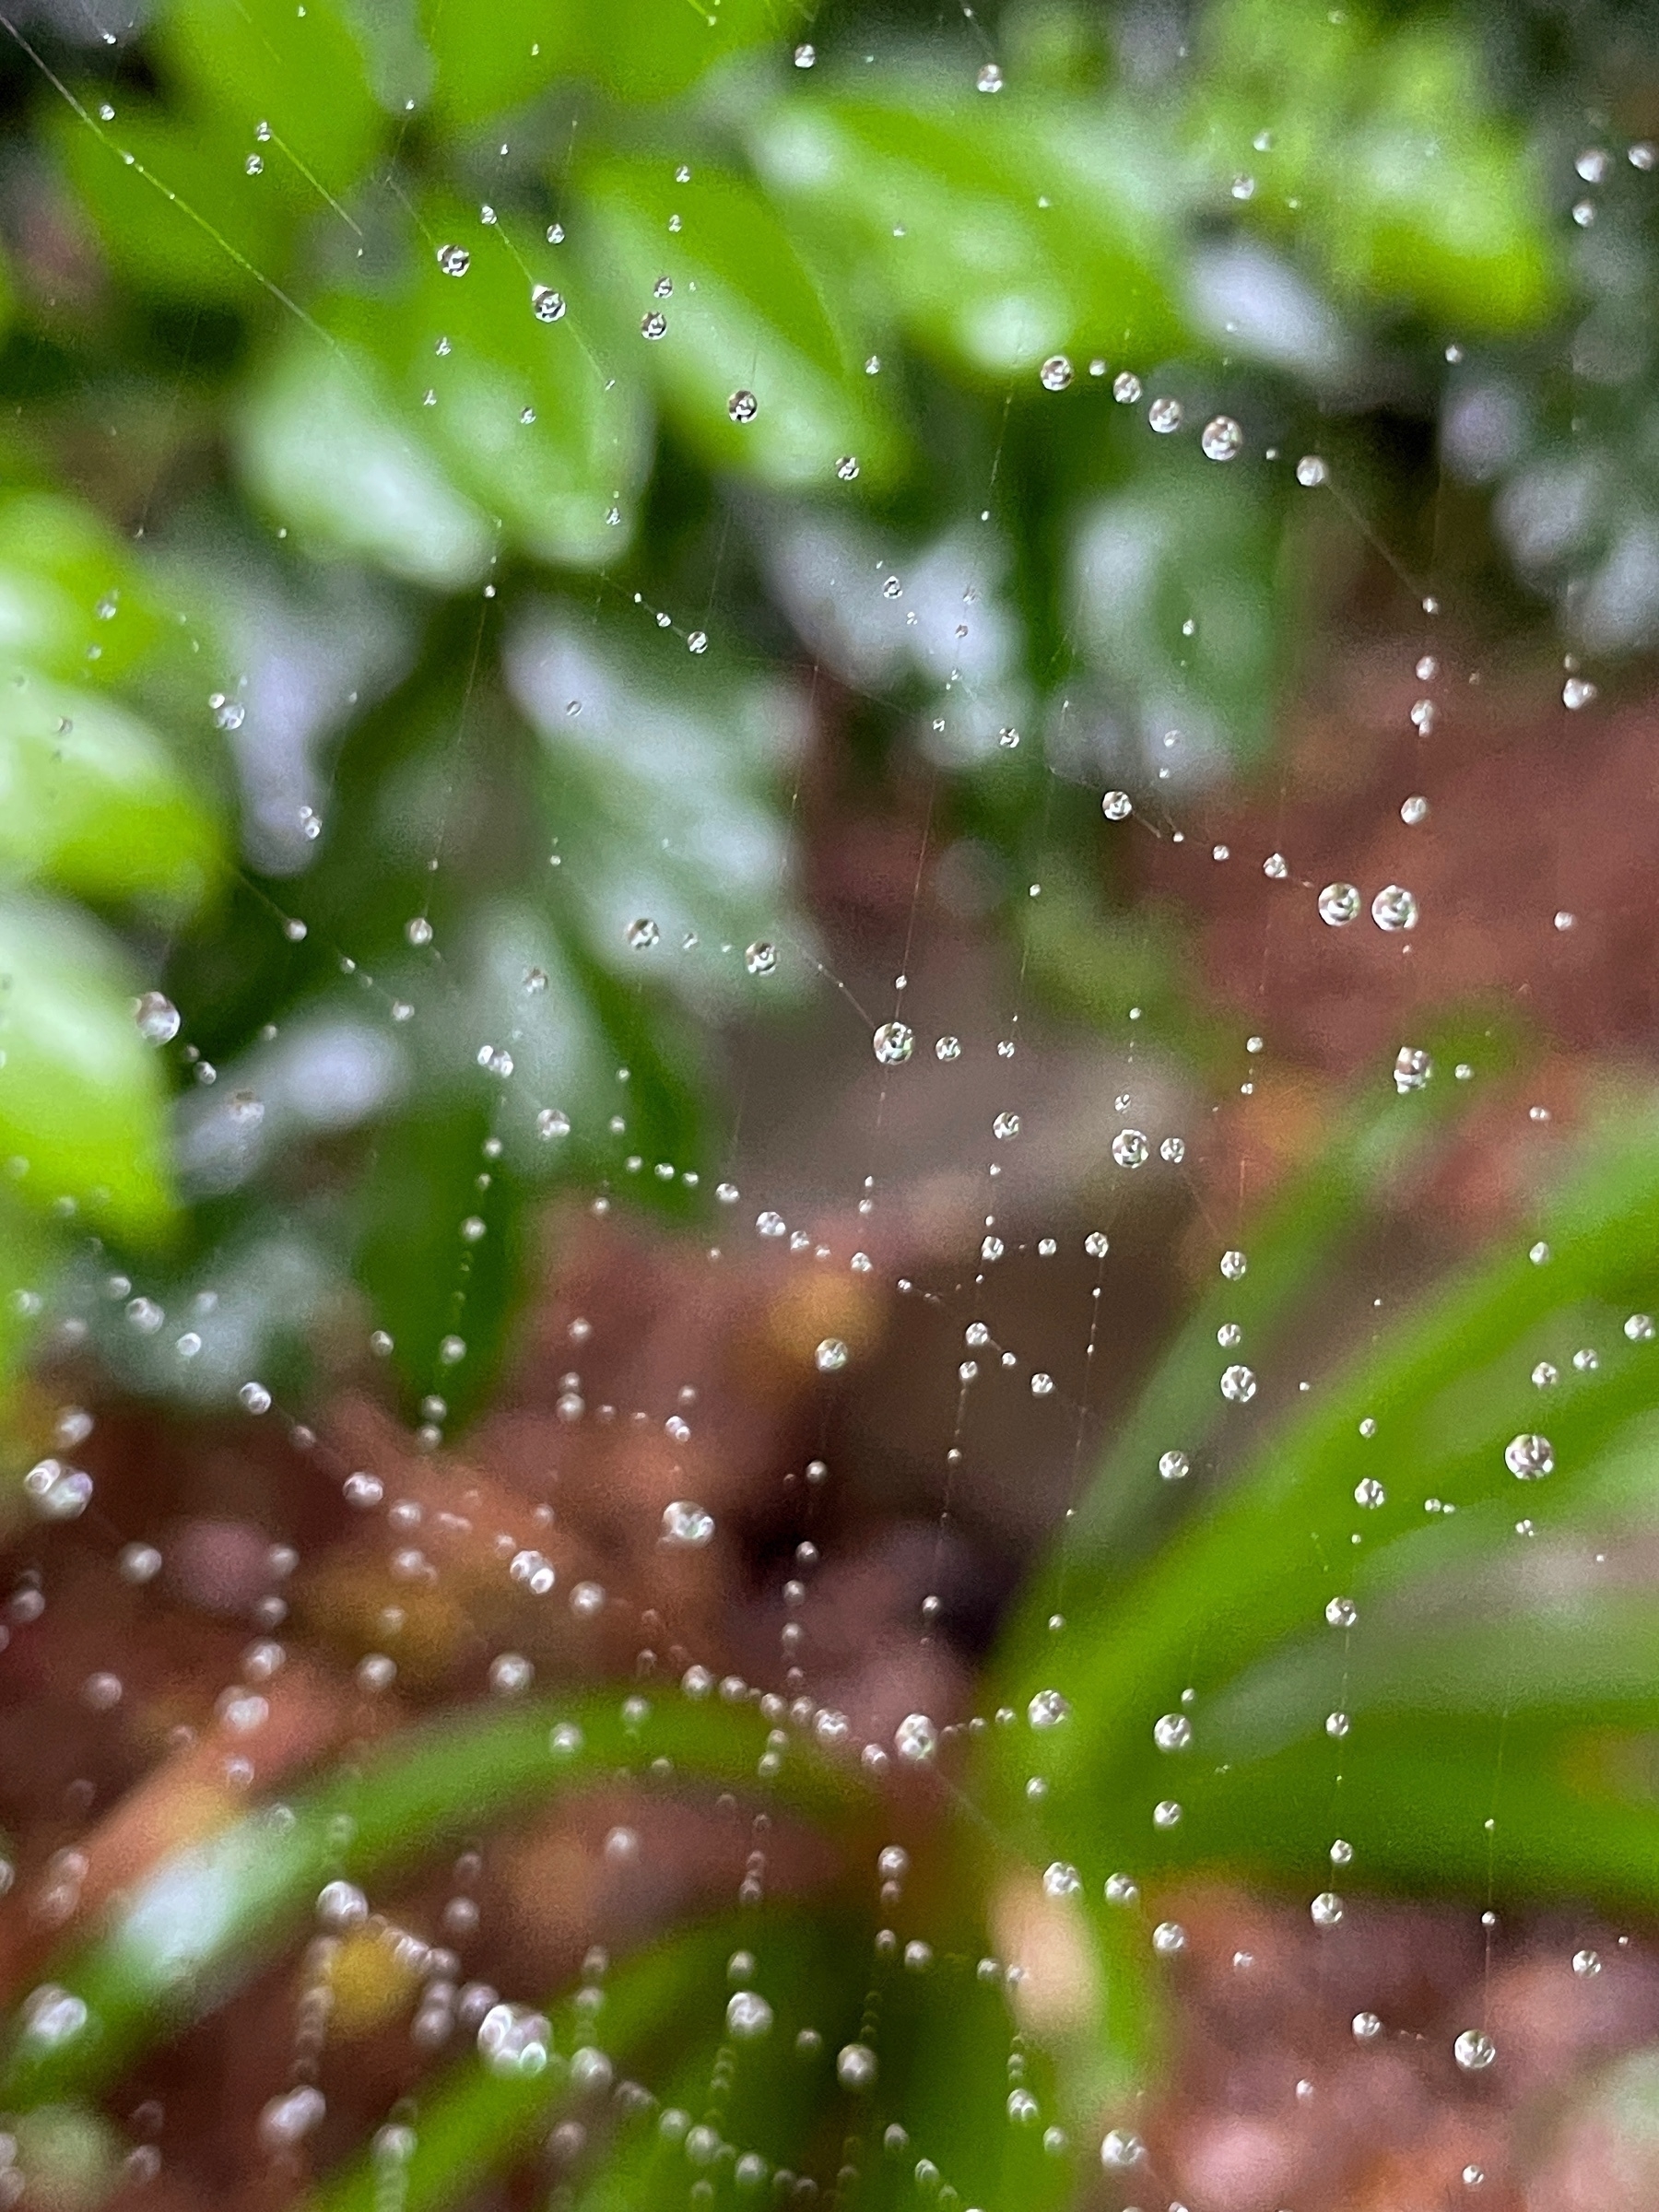 Raindrops on a spider's web with a blurred garden in the background